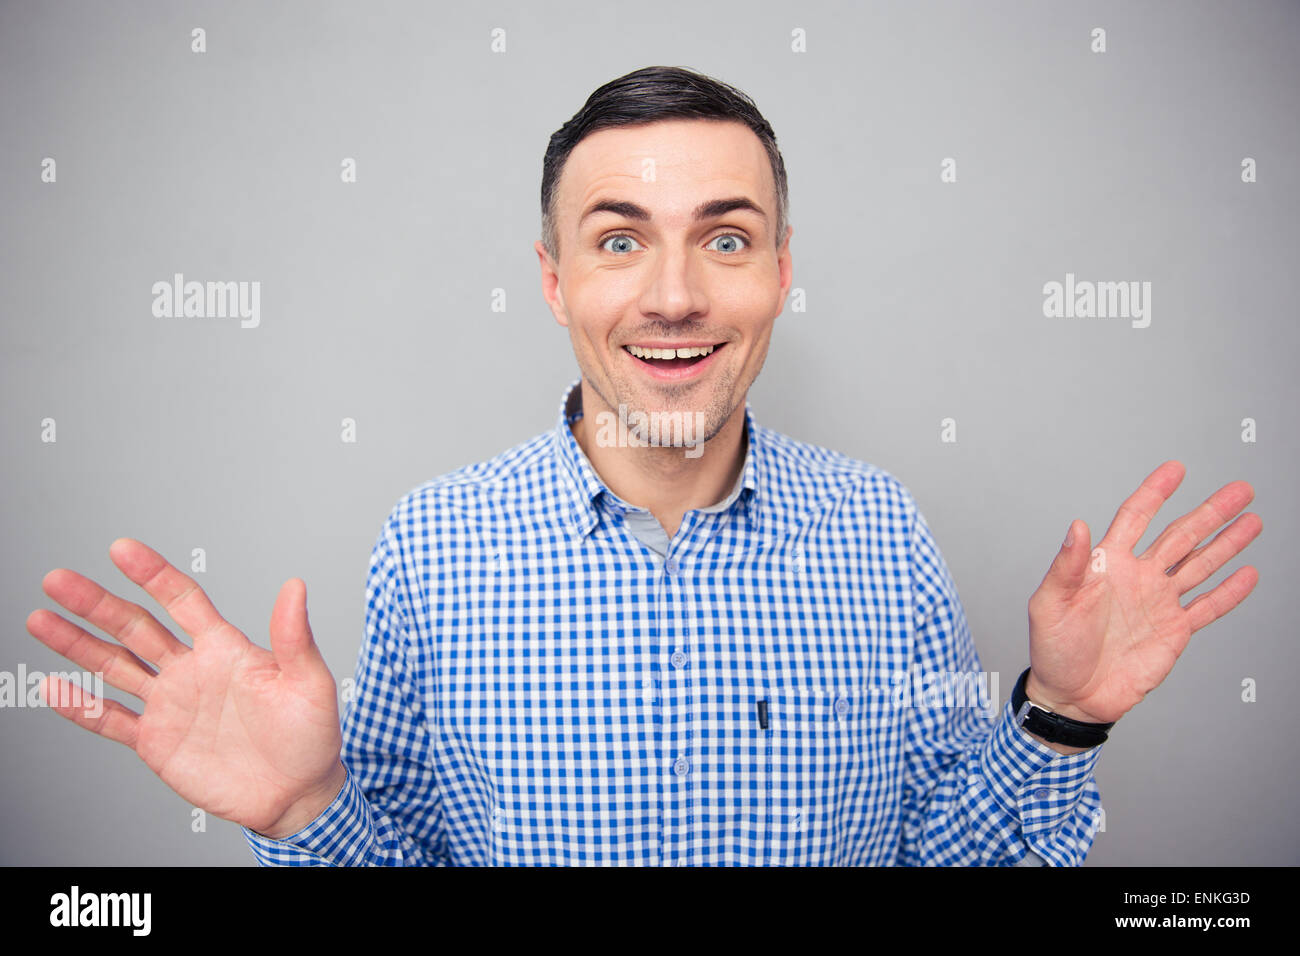 Portrait of a smiling man looking at camera over gray background Stock Photo